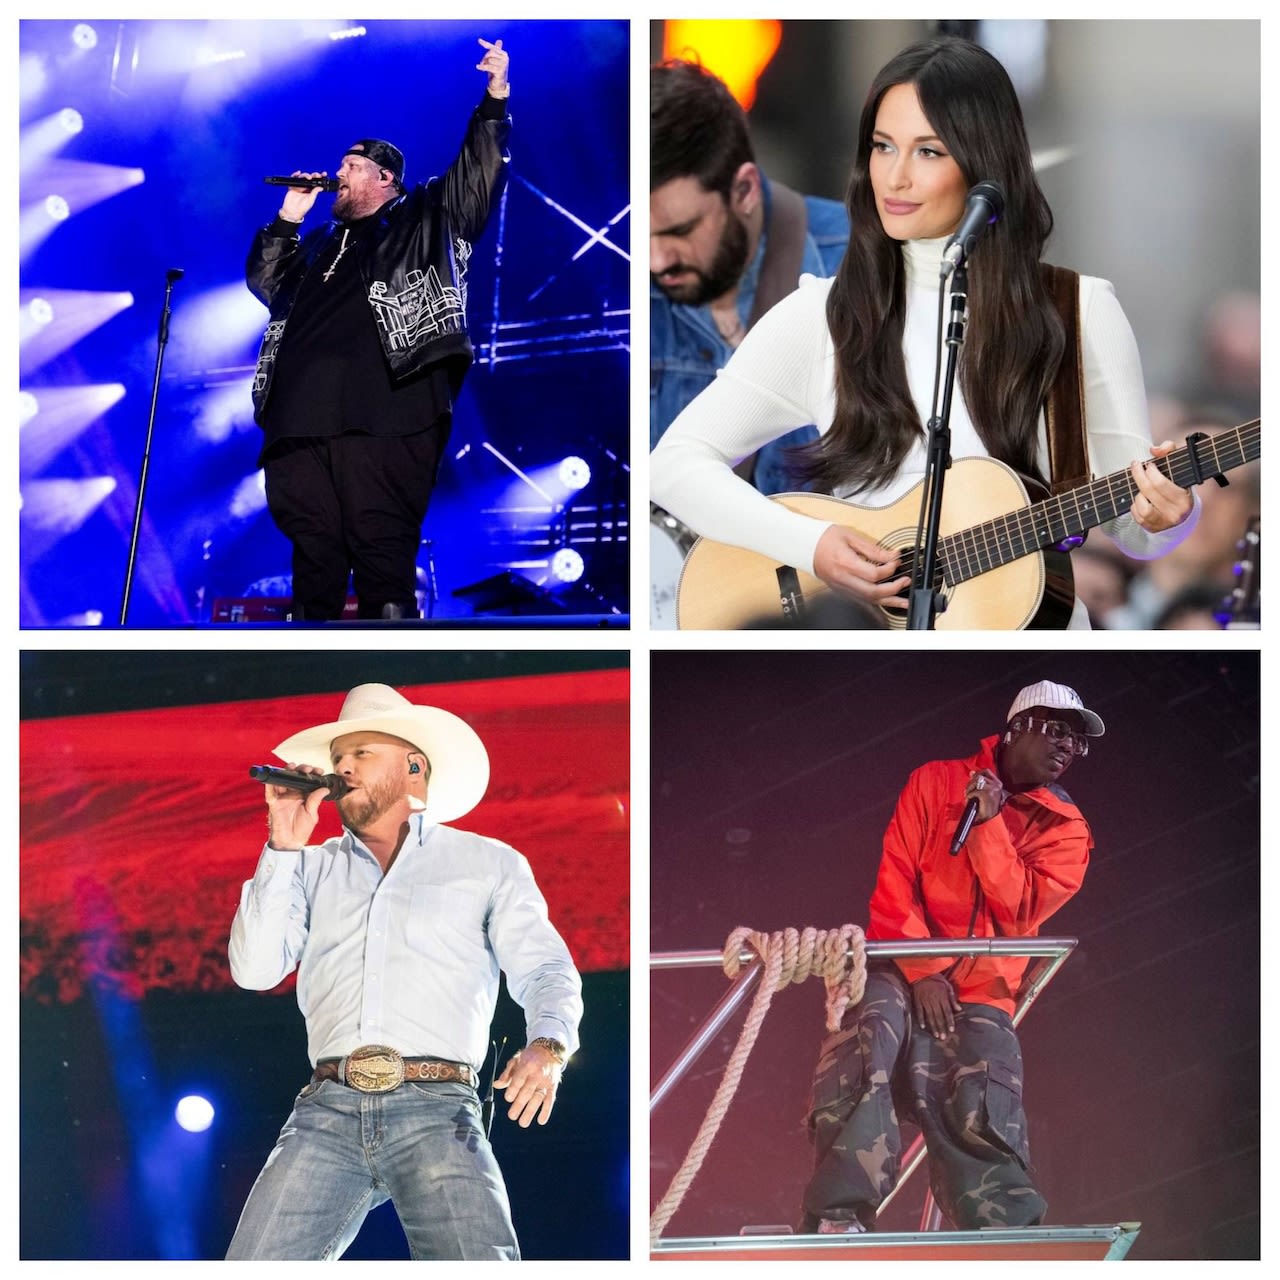 Concerts at BJC at Penn State: Where to buy tickets for Jelly Roll, Kacey Musgraves, Cody Johnson